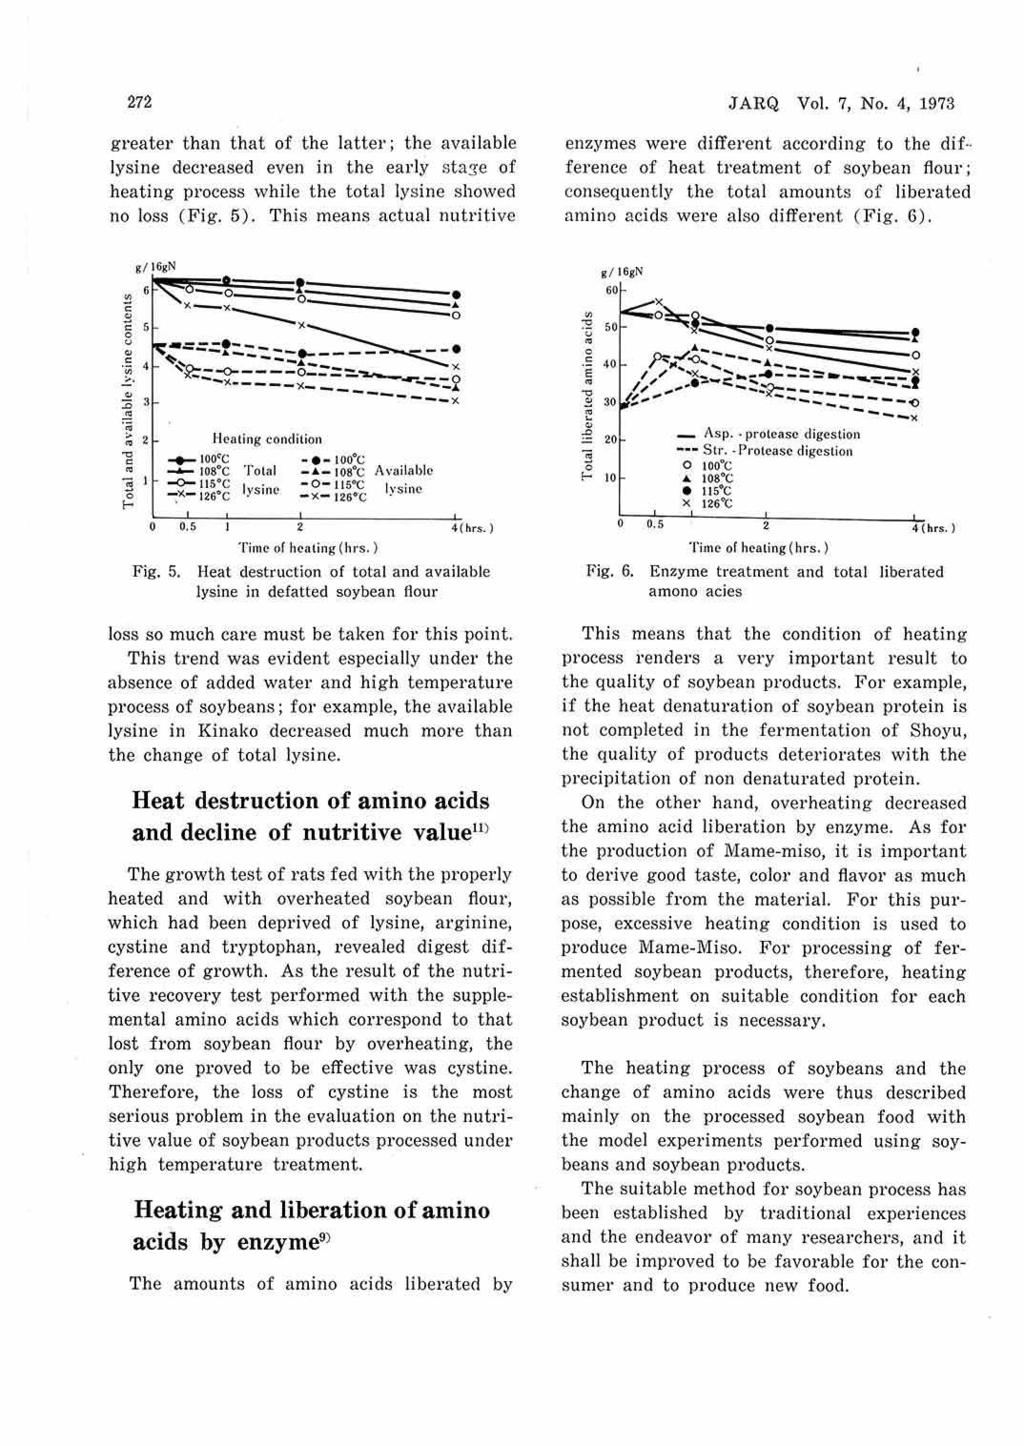 272 greater than that of the latter; the available lysine decreased even in the early stage of heating process while the total lysine showed no loss (Fig. 5). This means actual nutritive JARQ Vol.